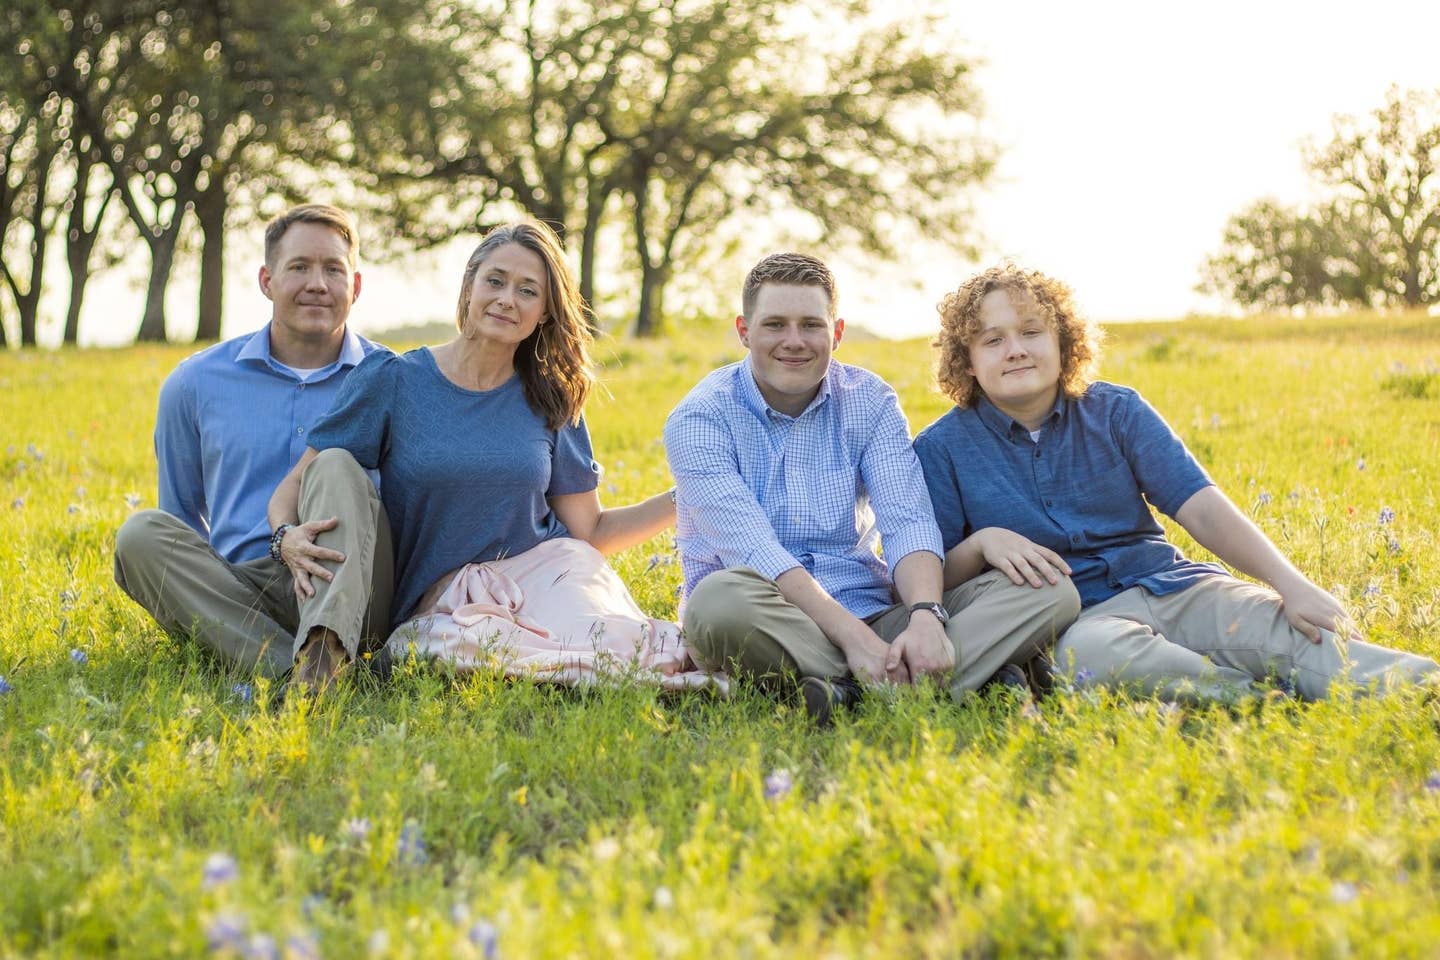 Corie Weathers poses with her husband and two sons, sitting in a field.